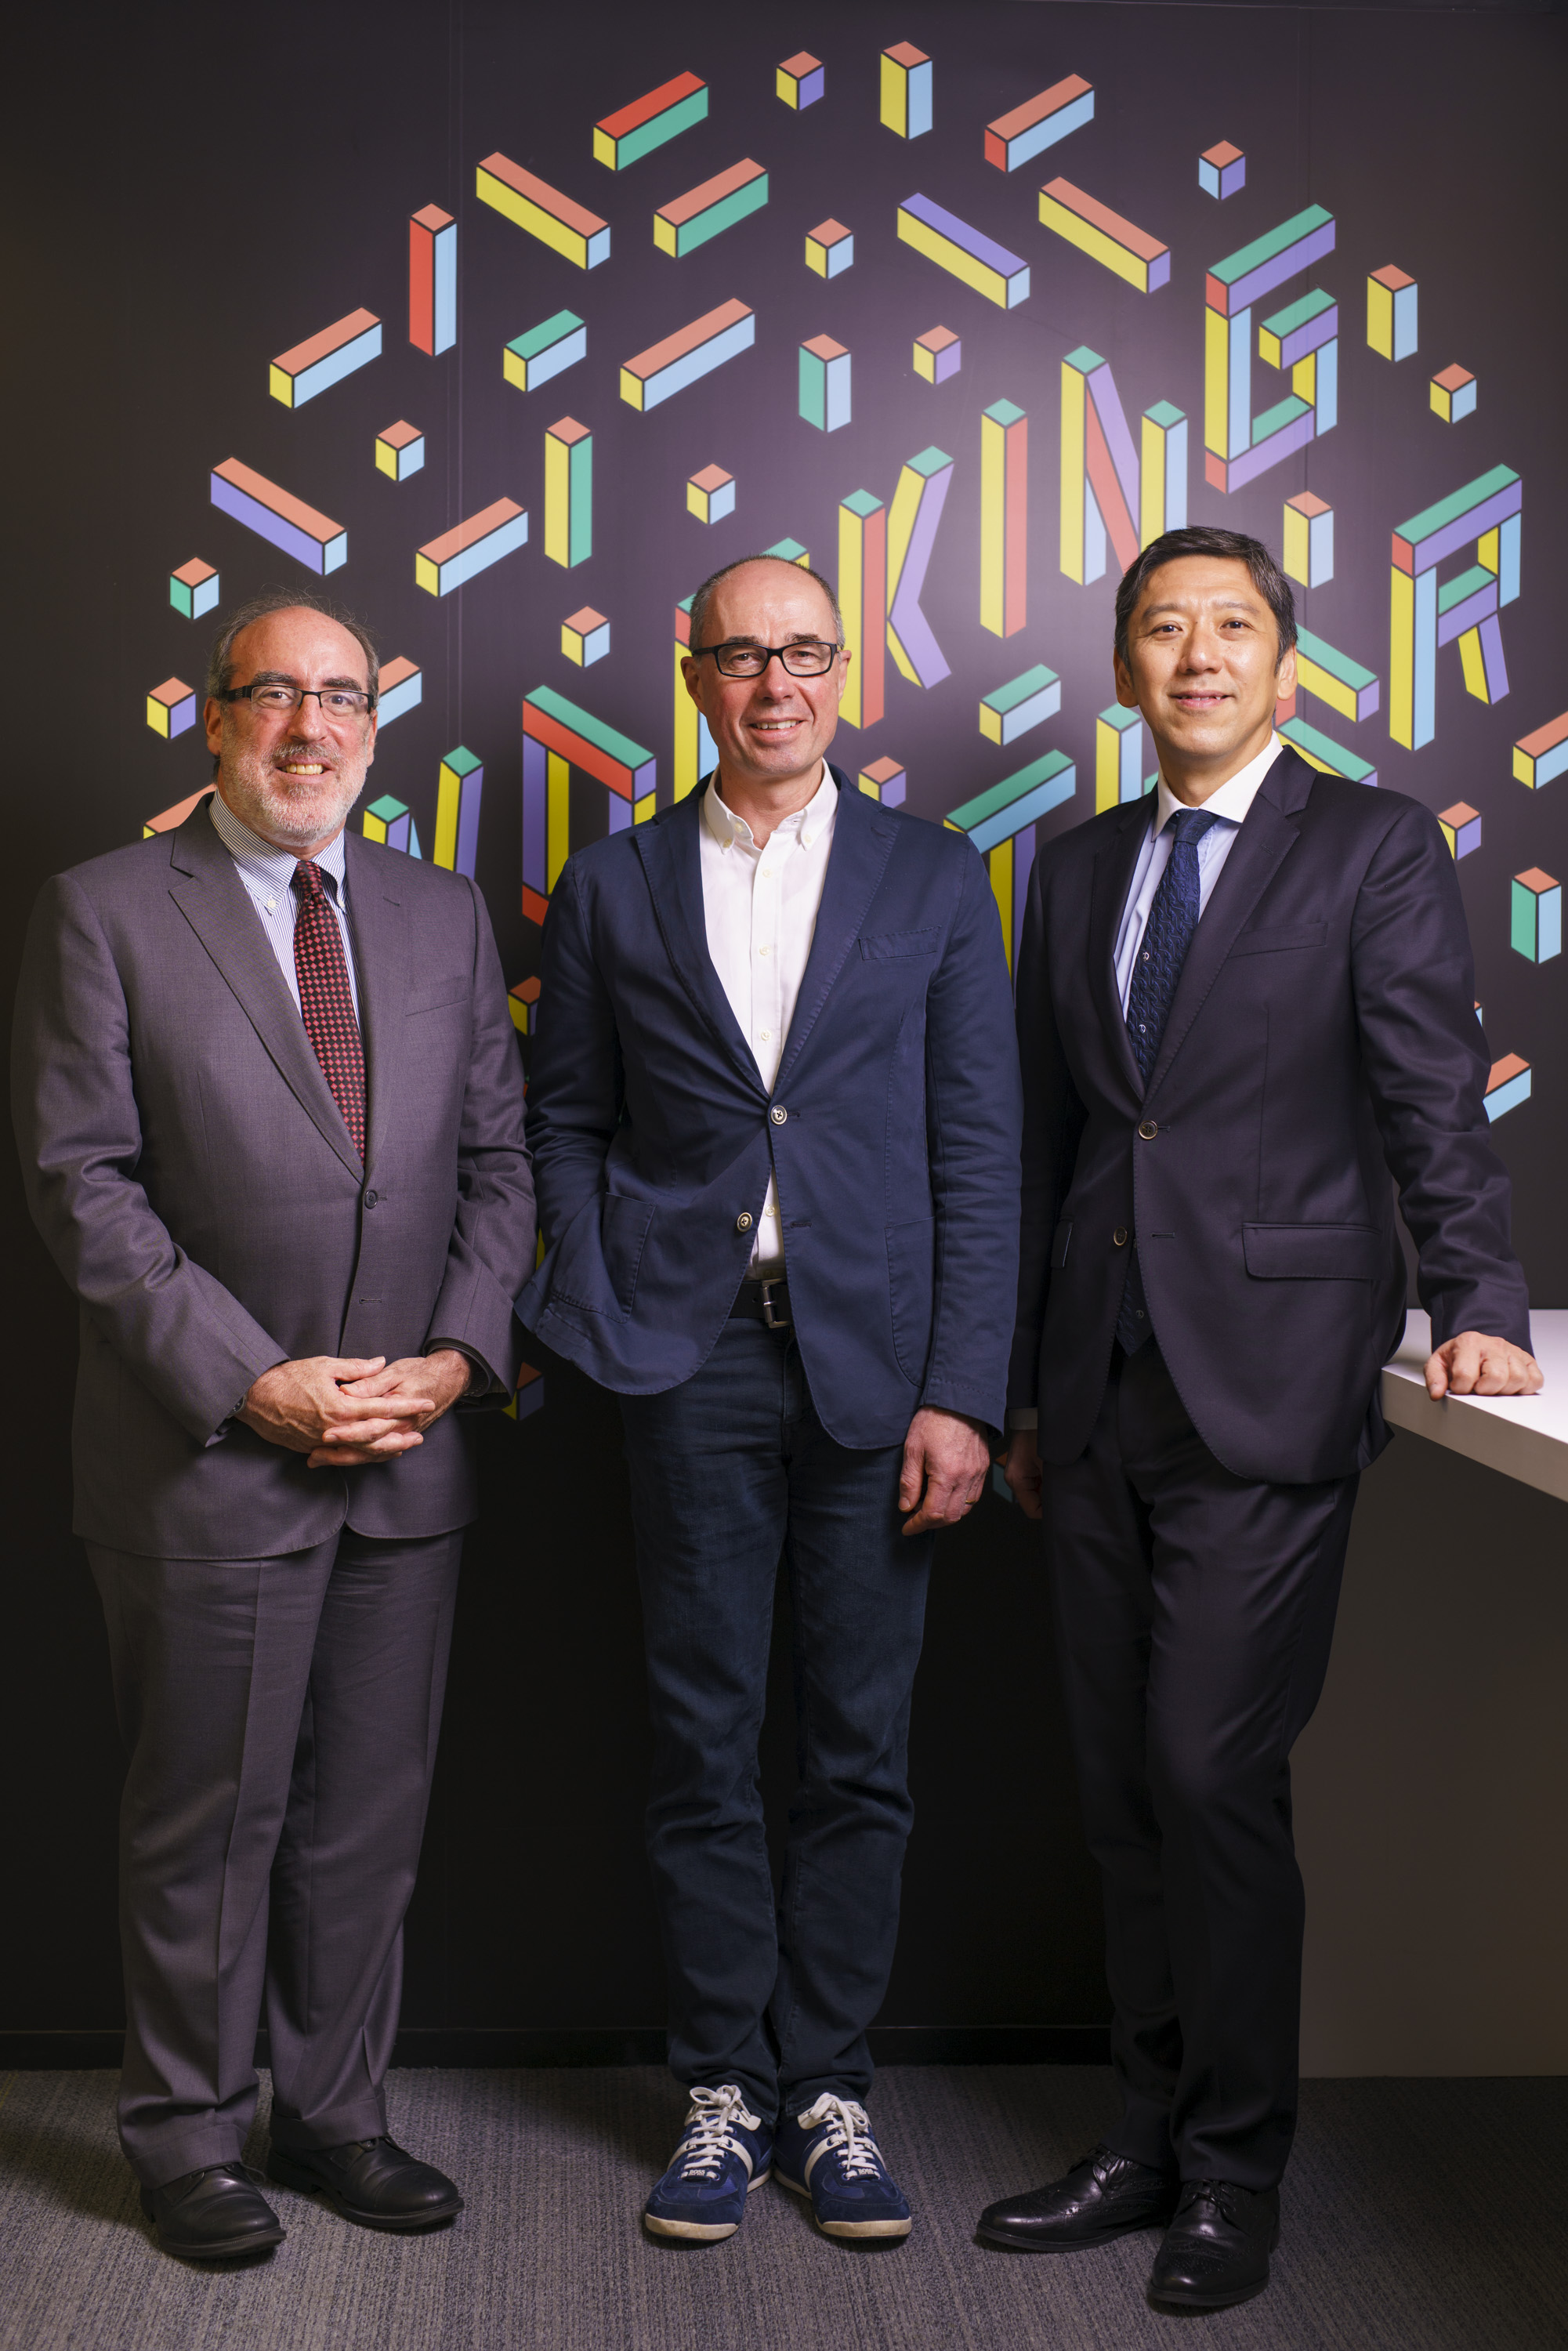  (Left to Right) Jeff Schwartz, Principal; Brett Walsh, Partner; and Jungle Wong, Chief Talent Officer. All members of Deloitte. 